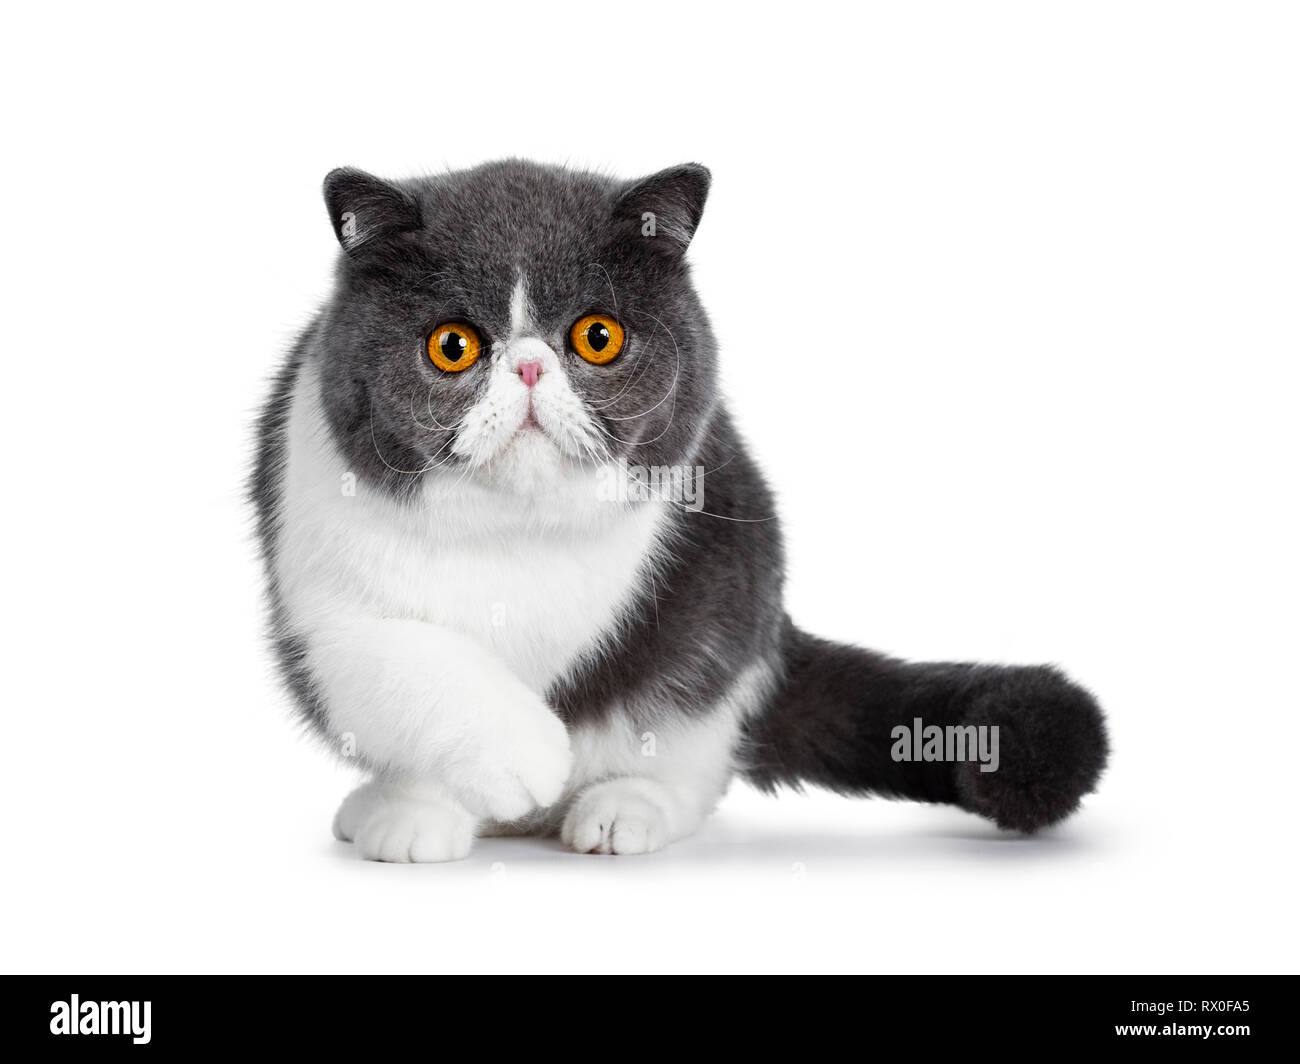 Blue with white young Exotic Shorthair cat, standing / walking facing front. Looking curious straight in lens with amazing round orange eyes. Isolated Stock Photo